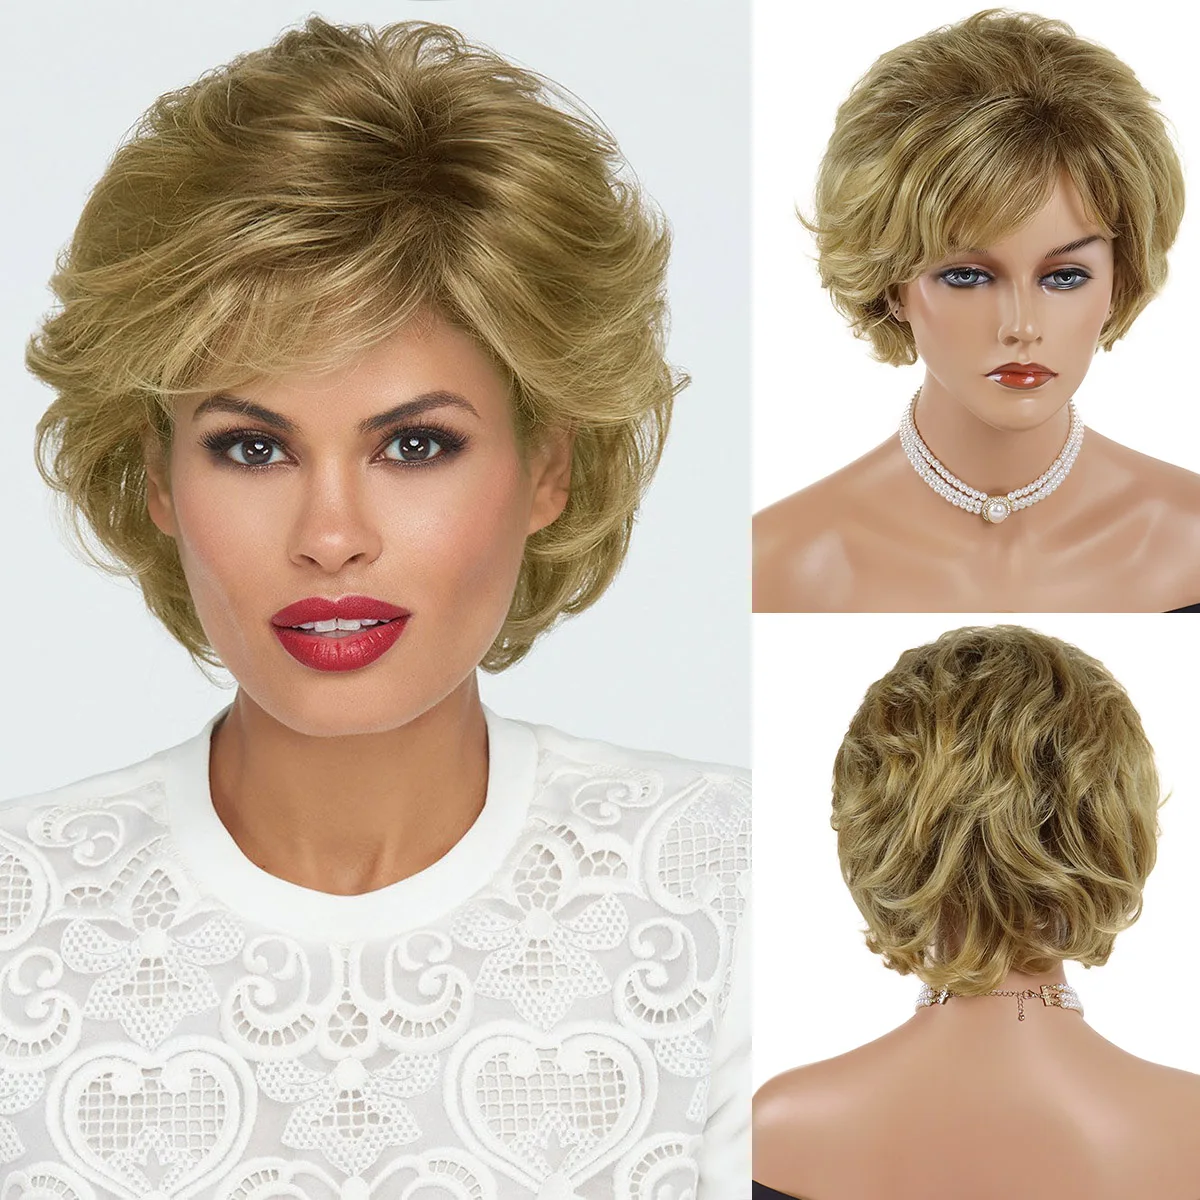 

GNIMEGIL Synthetic Hair Short Curly Wigs for Women Gradient Golden Blonde Wig with Bang Layered Haircut Natural Wig Gift Costume